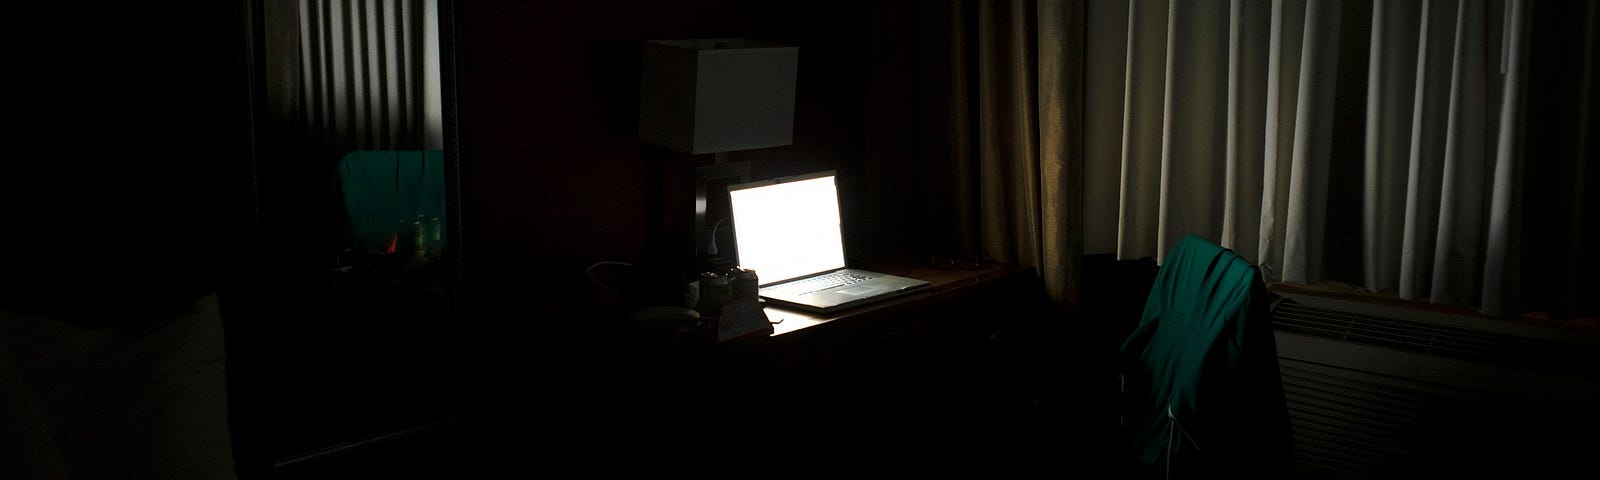 Only a bright laptop screen is visible in this dark room.